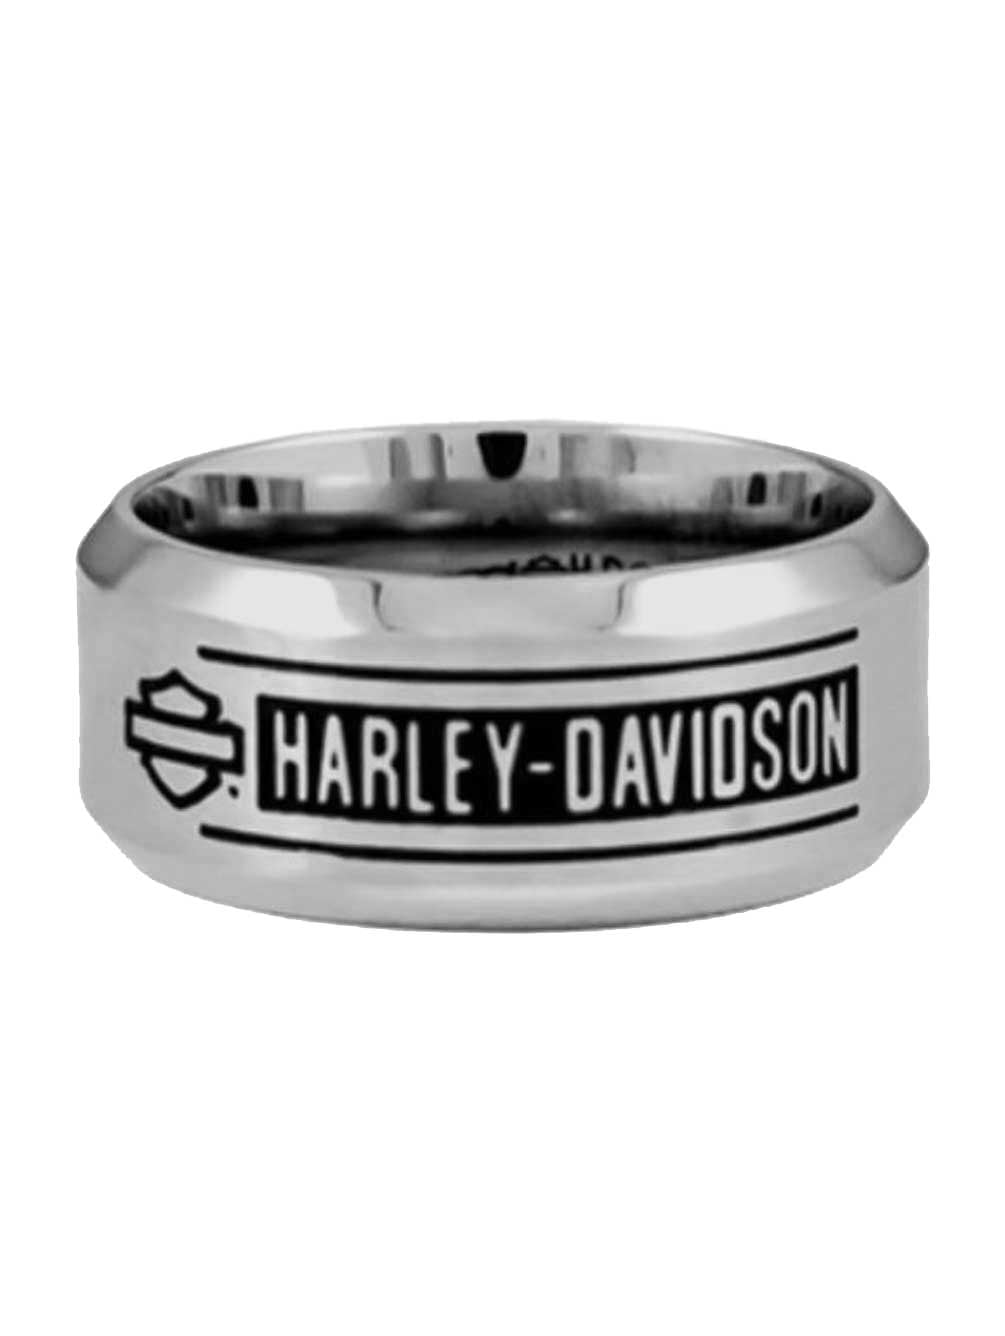 HARLEY-DAVIDSON MOD Steel Cable Band Ring